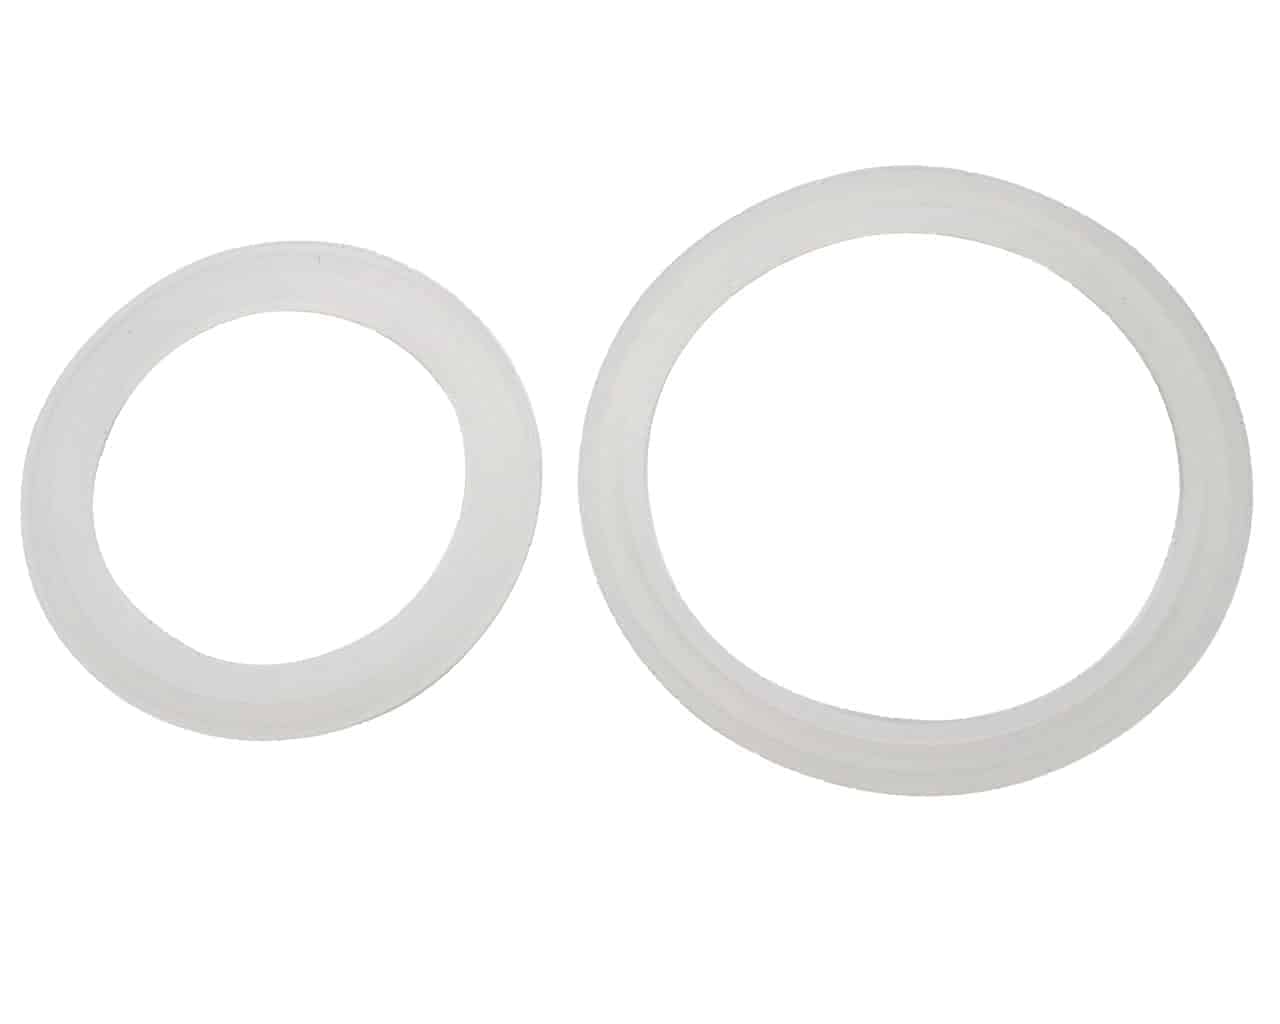 Leak Proof Silicone Sealing Rings Seals for Ball Plastic Caps